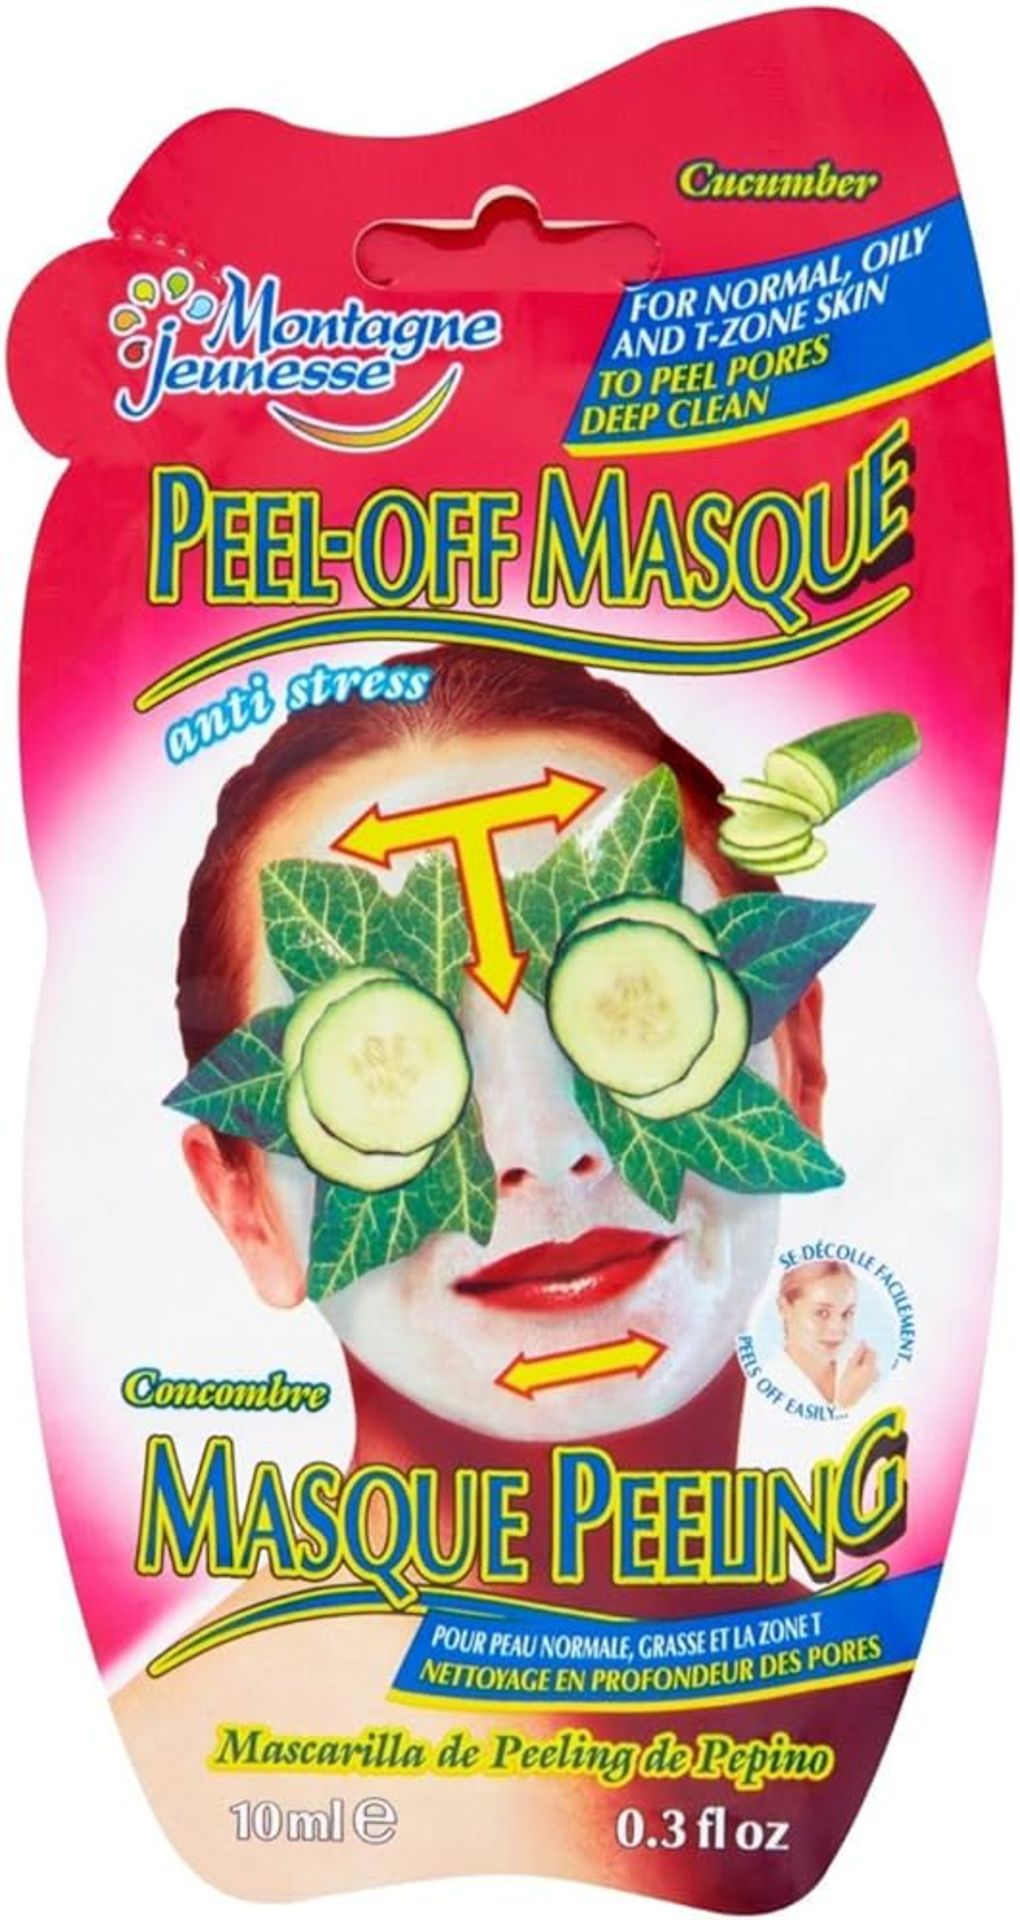 Bulk Trade Lot 200 x Montagne Jeunesse Face Masks. RRPs Vary from £2.50 - £6. This lot has a RRP - Image 11 of 16